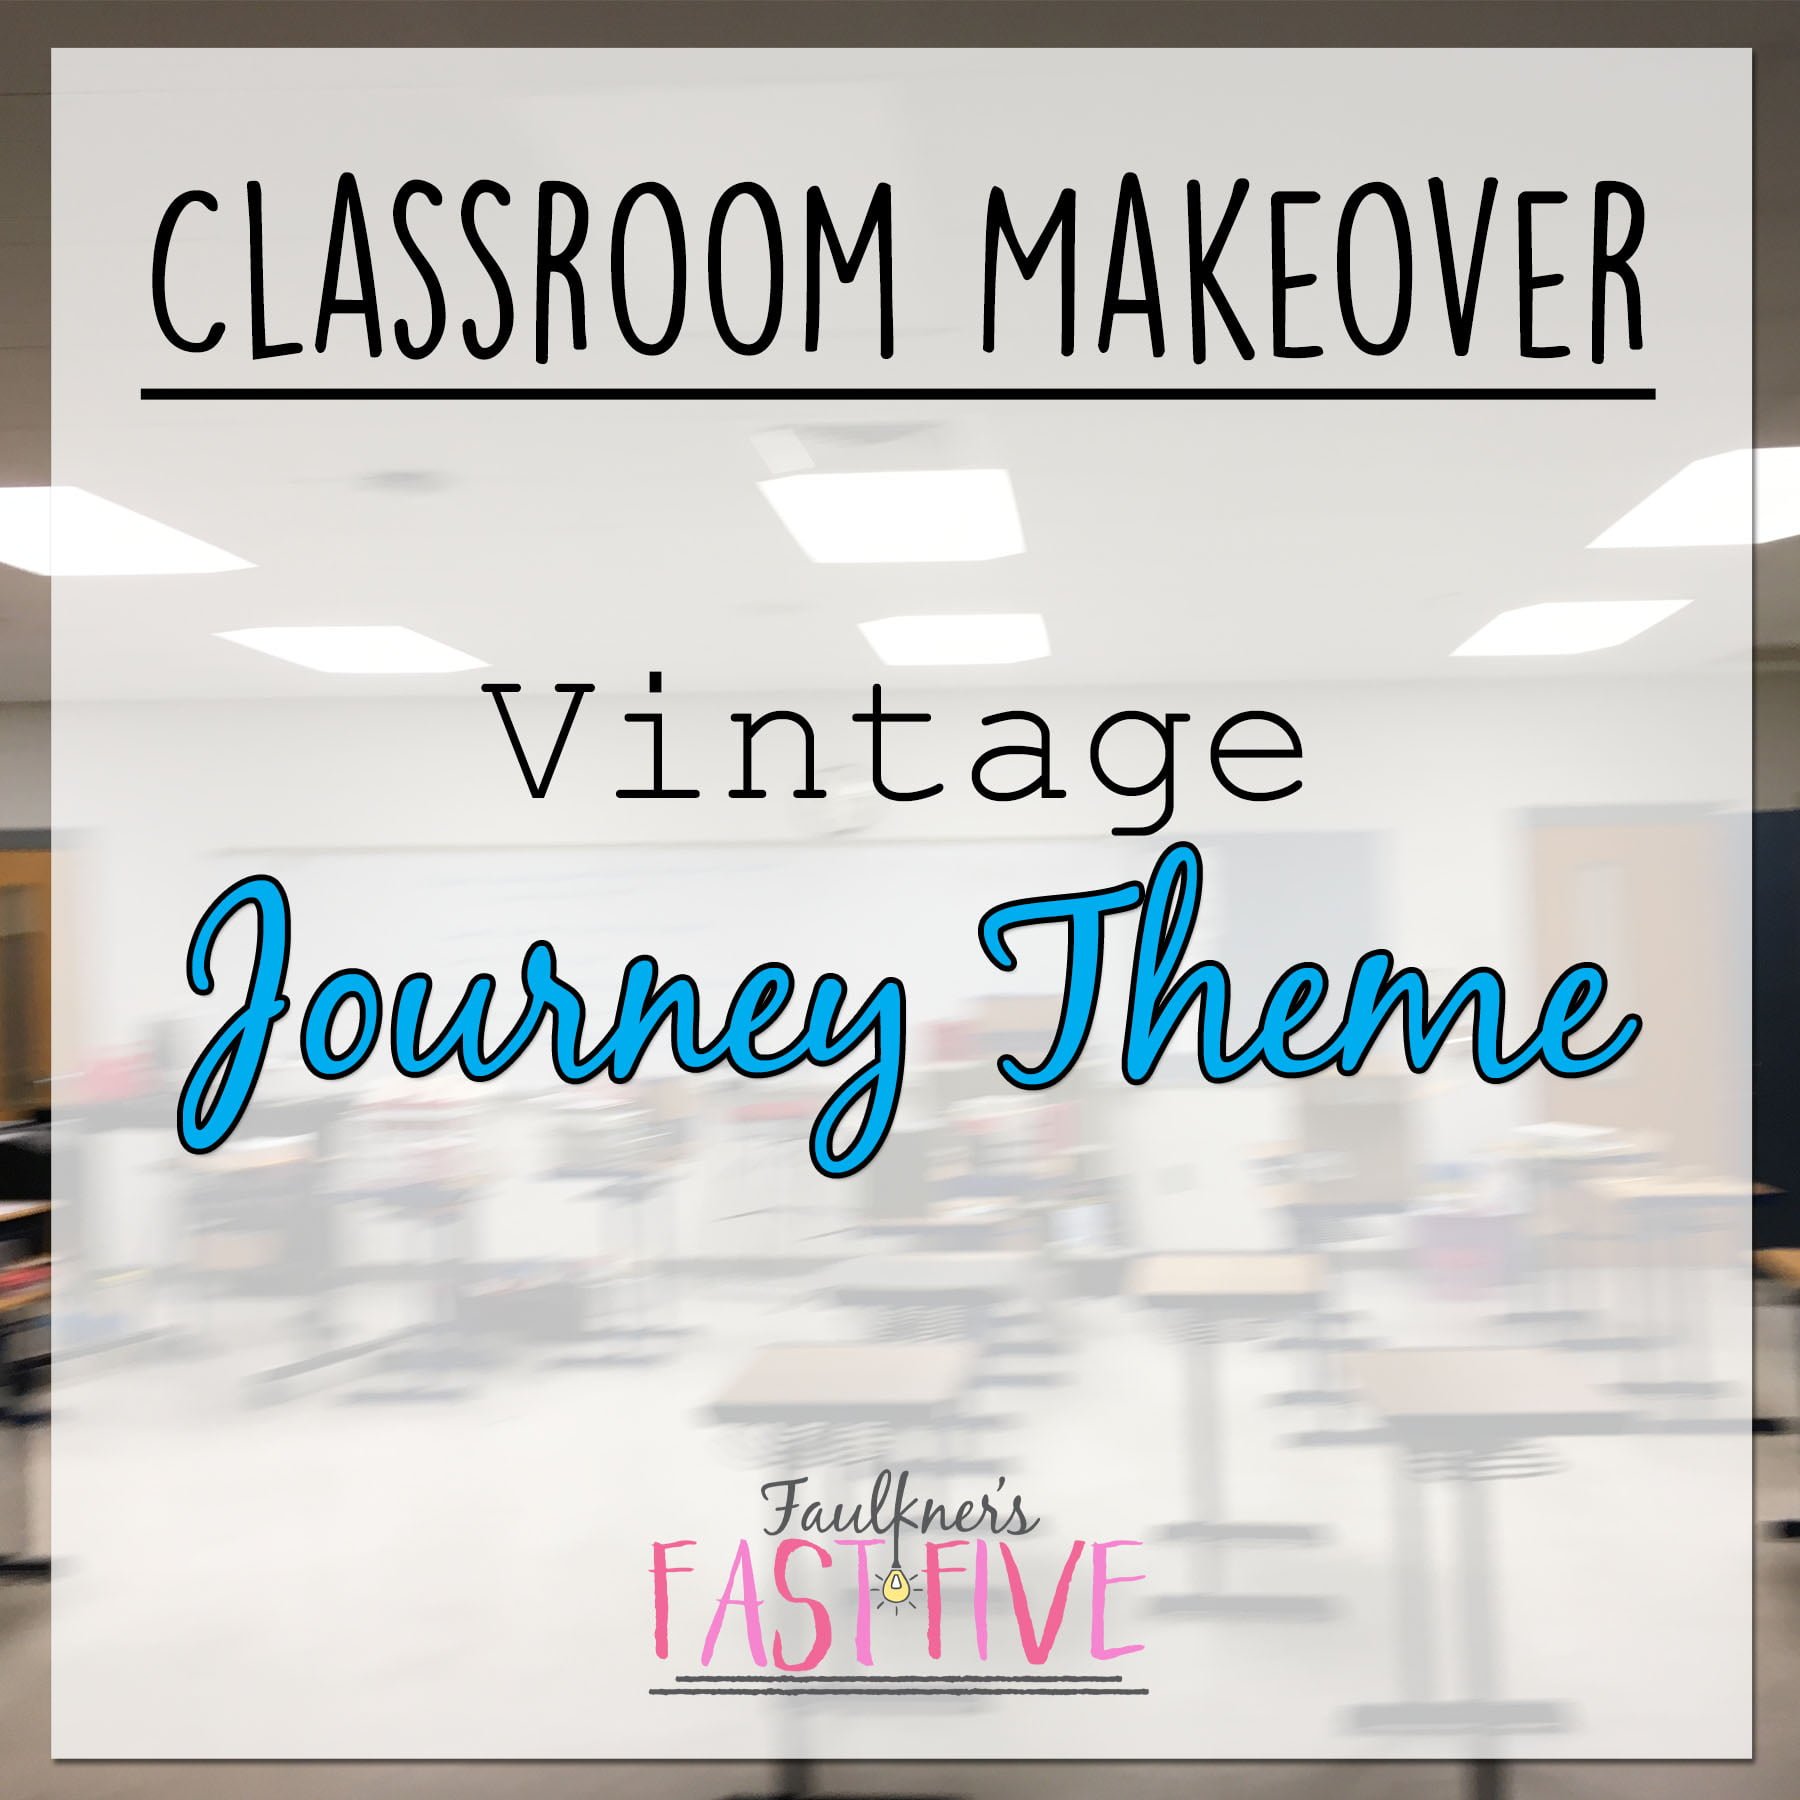 Ideas For Decorating A Middle High School Classroom Journey Theme Faulkner S Fast Five